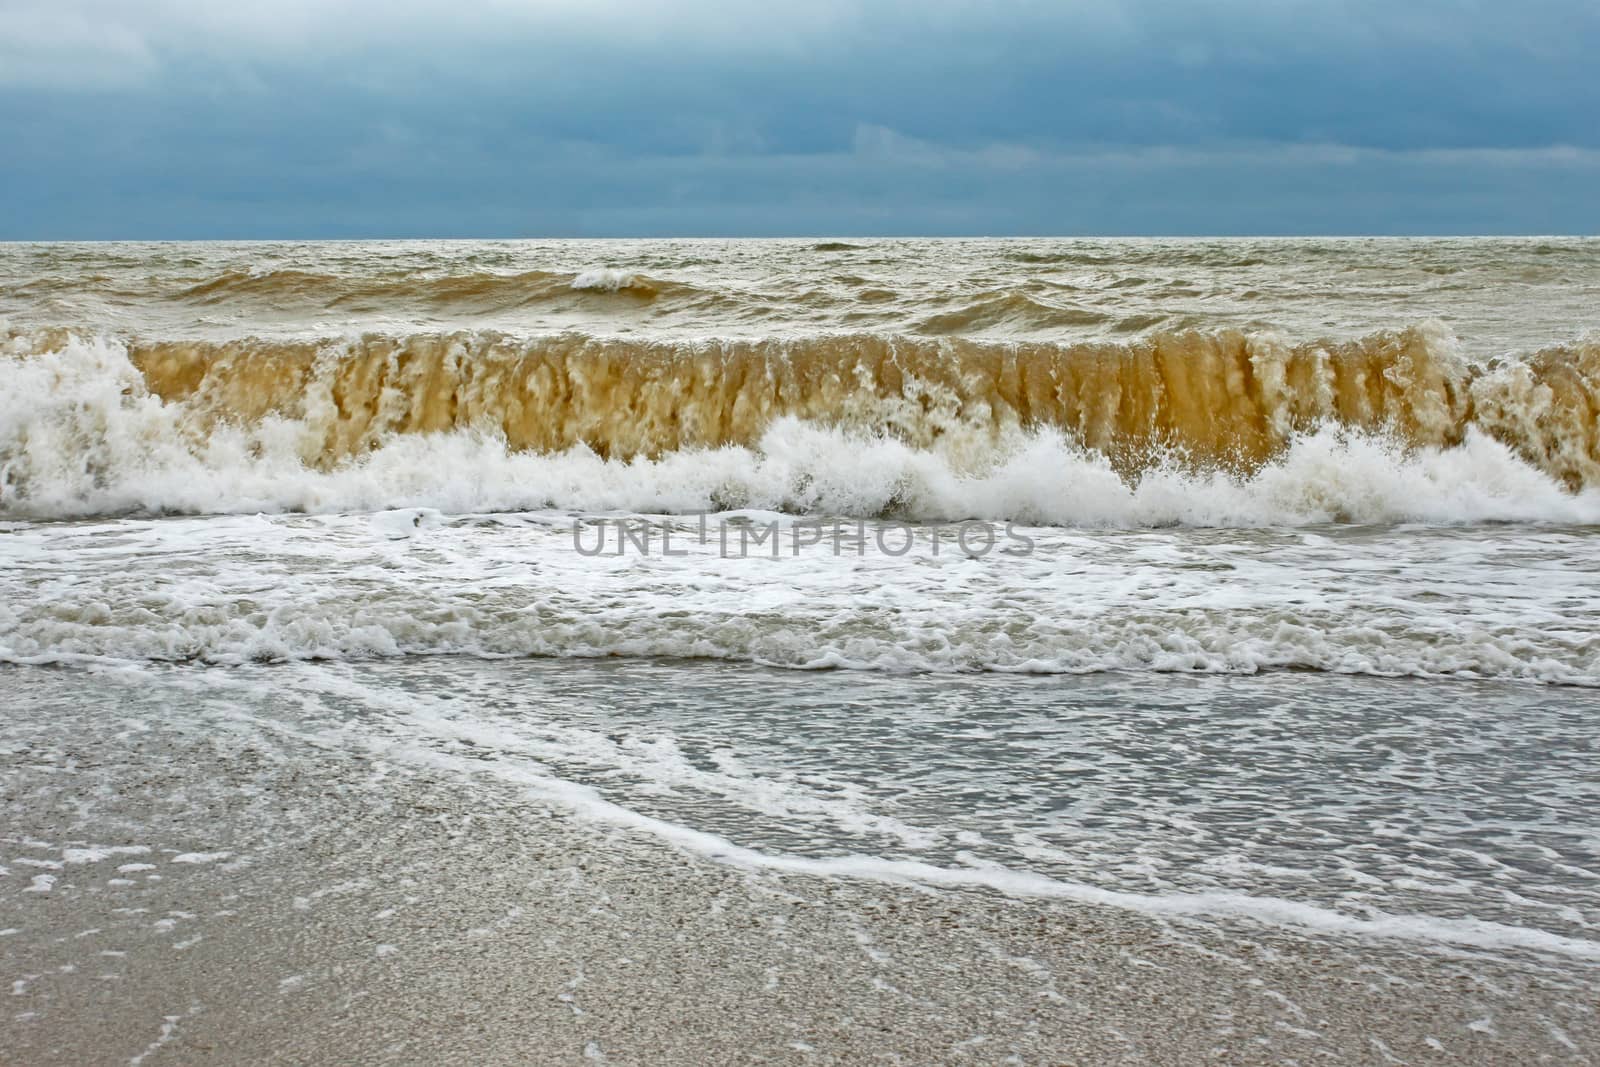 Big stormy wave with sand contaminated water directed ashore